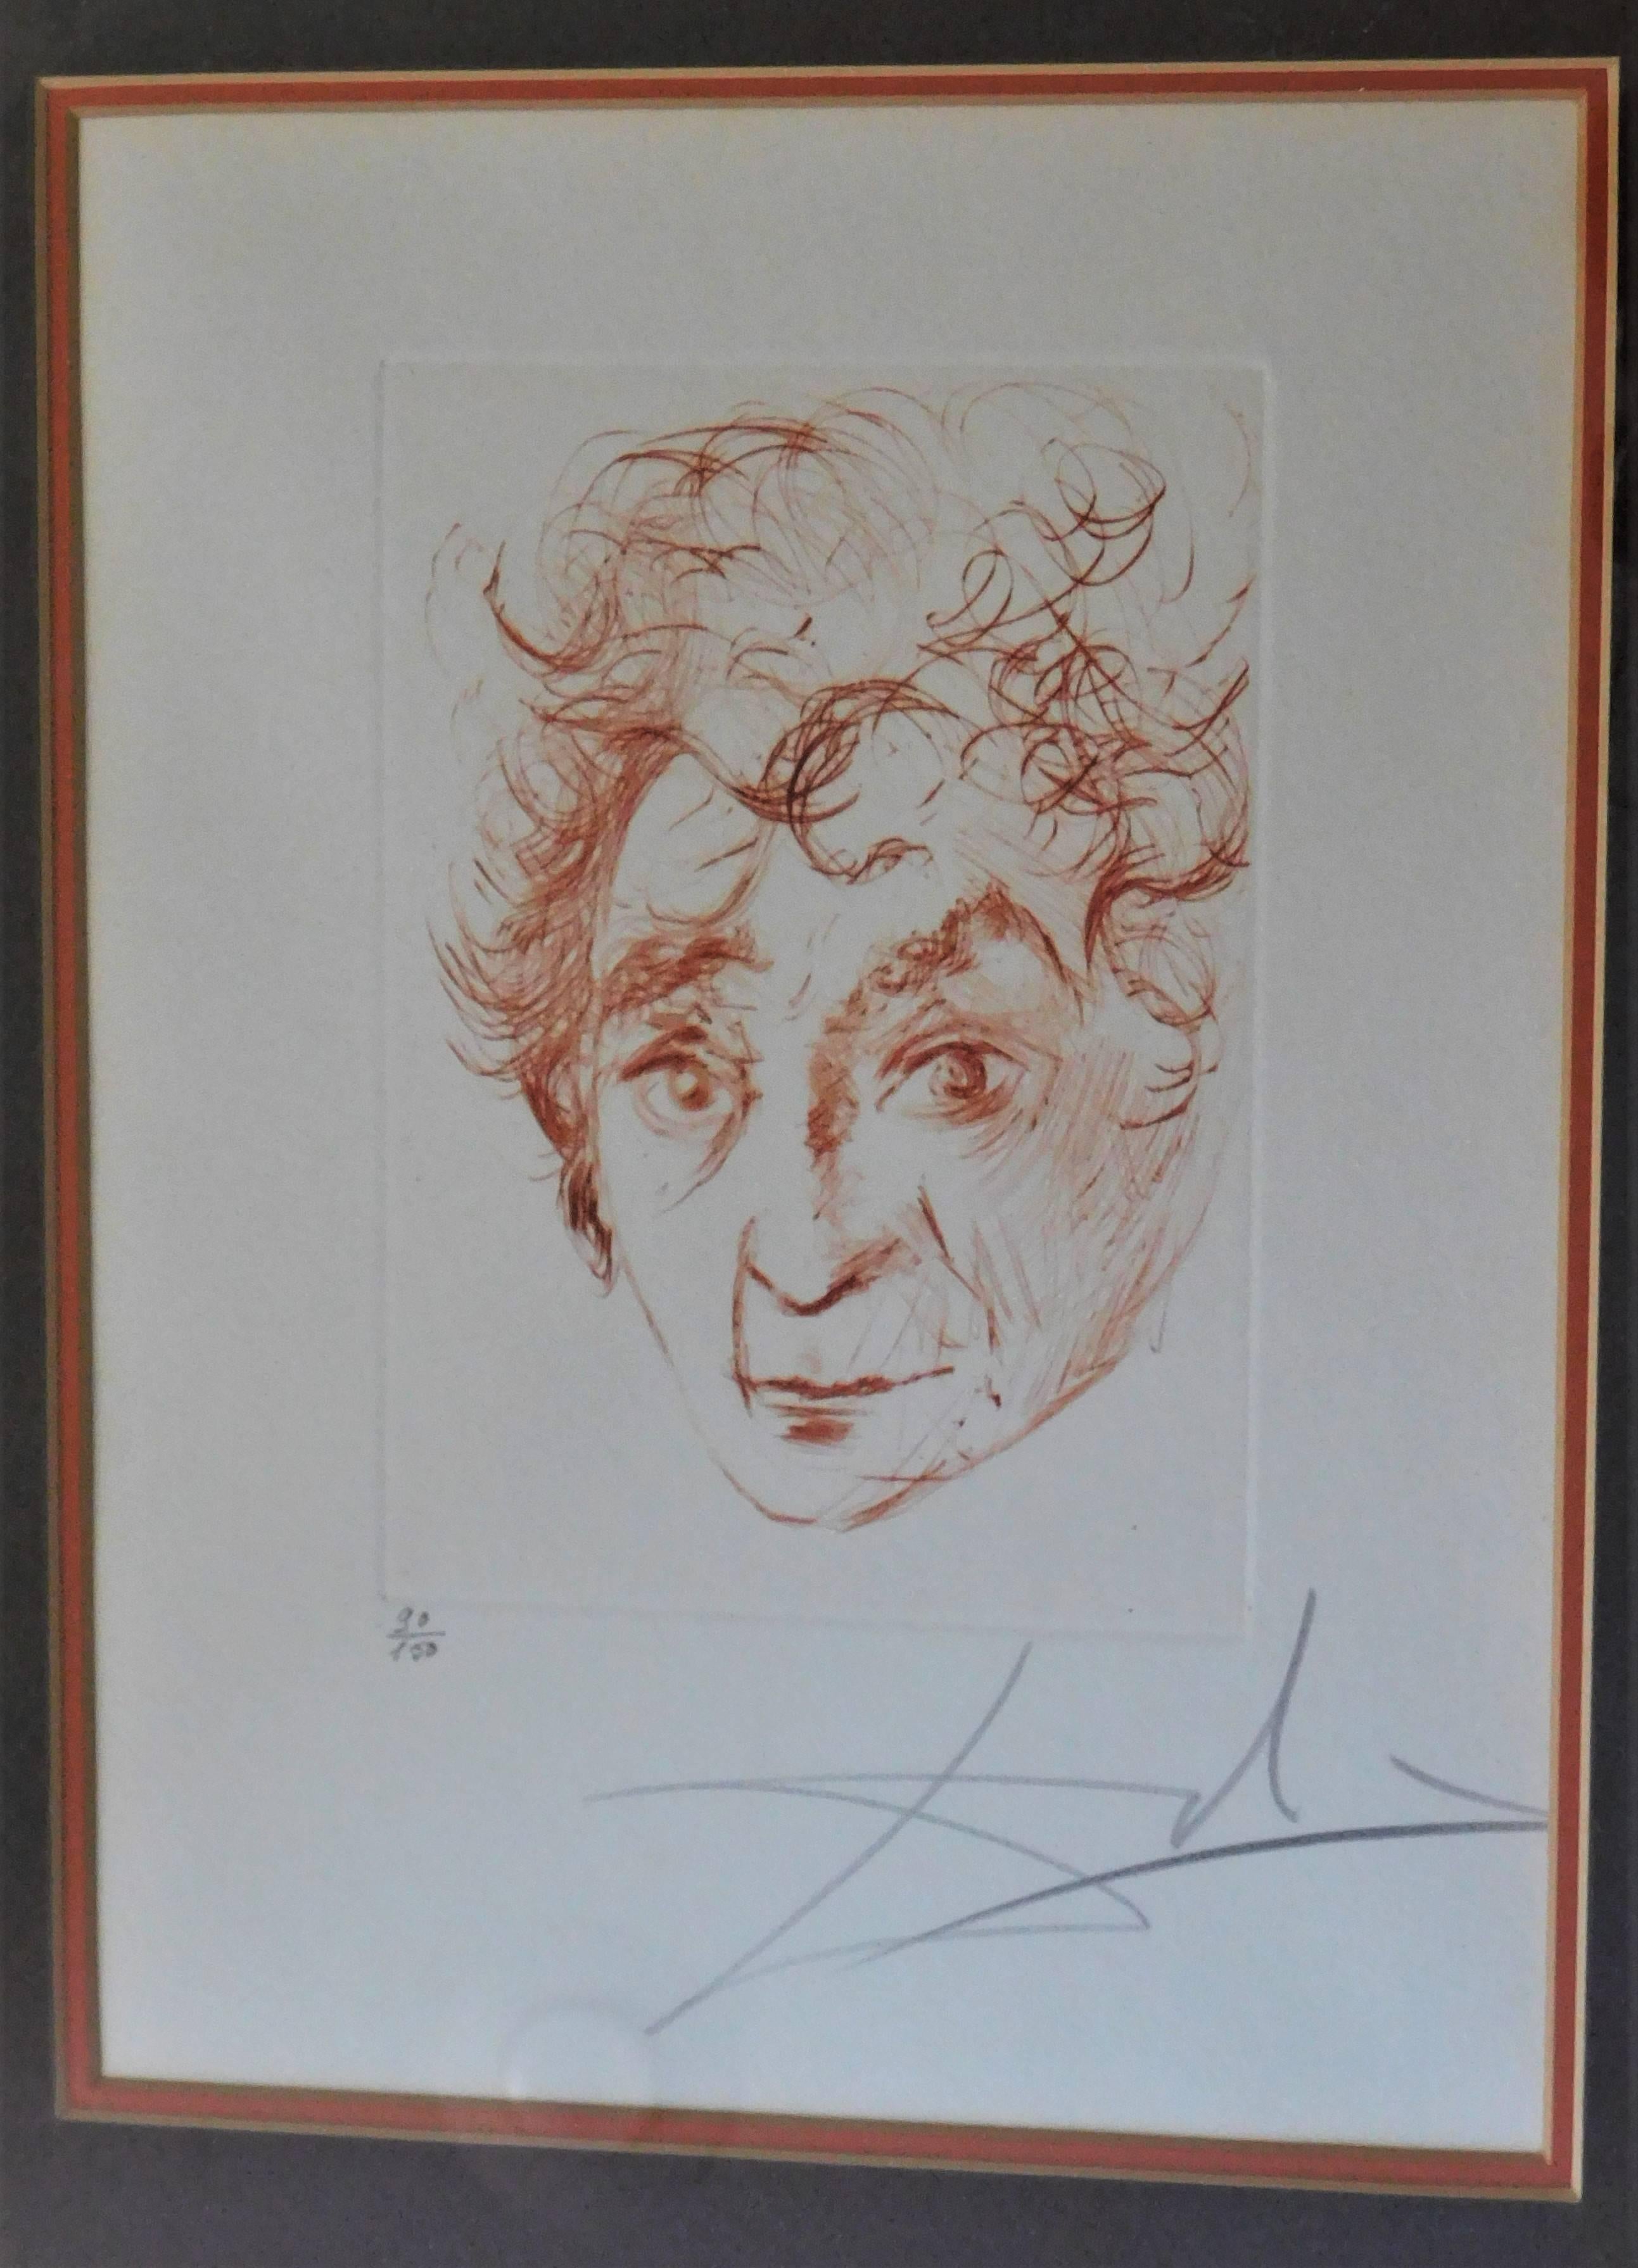 This midcentury hand signed Salvador Dali (1904-1989) abstract print of 